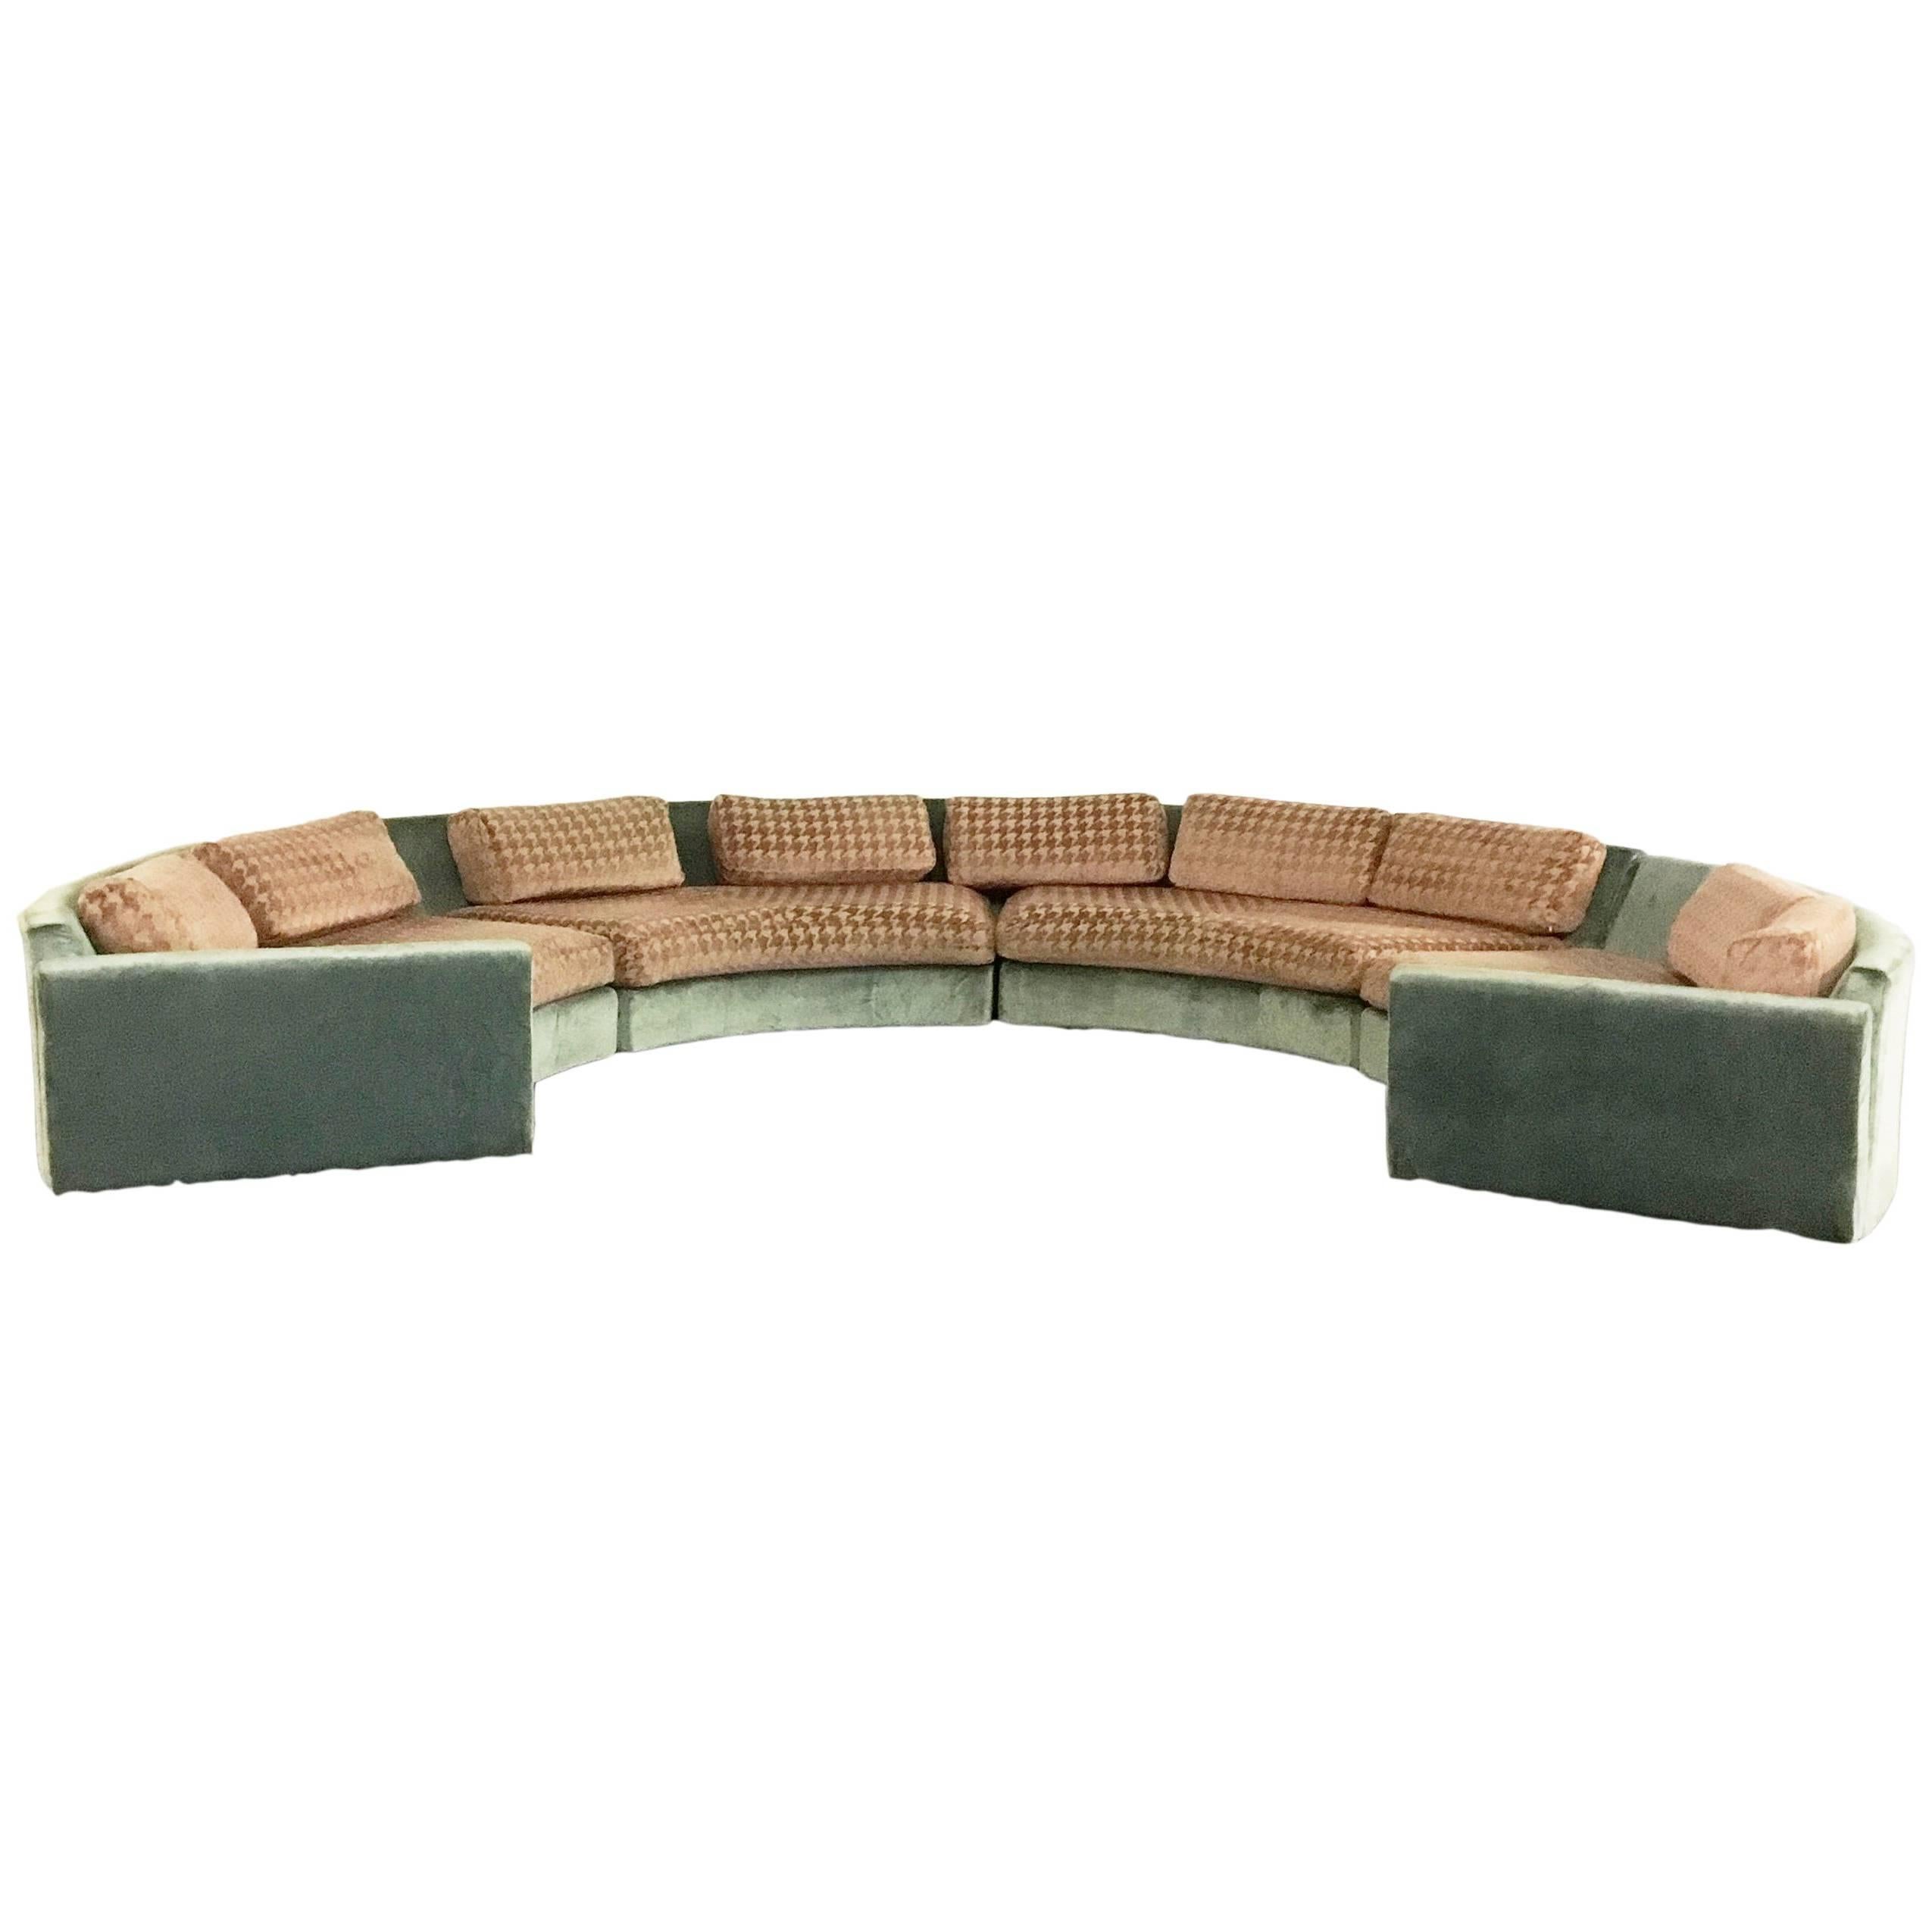 Adrian Pearsall for Craft Associates Circle Sofa For Sale